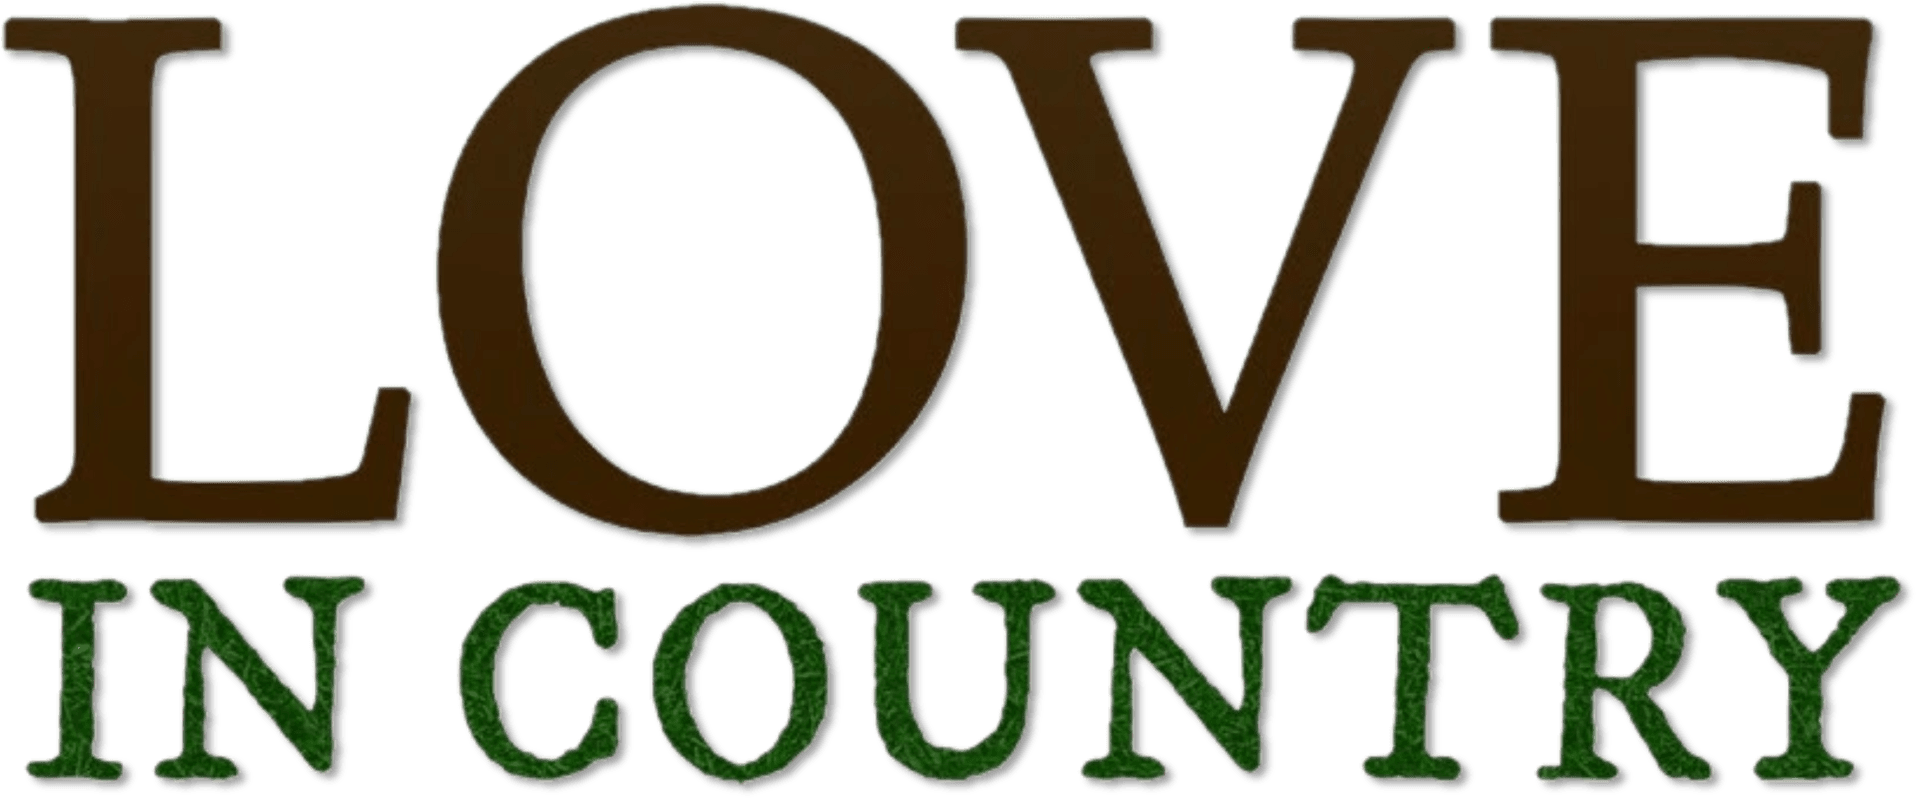 Love in Country logo